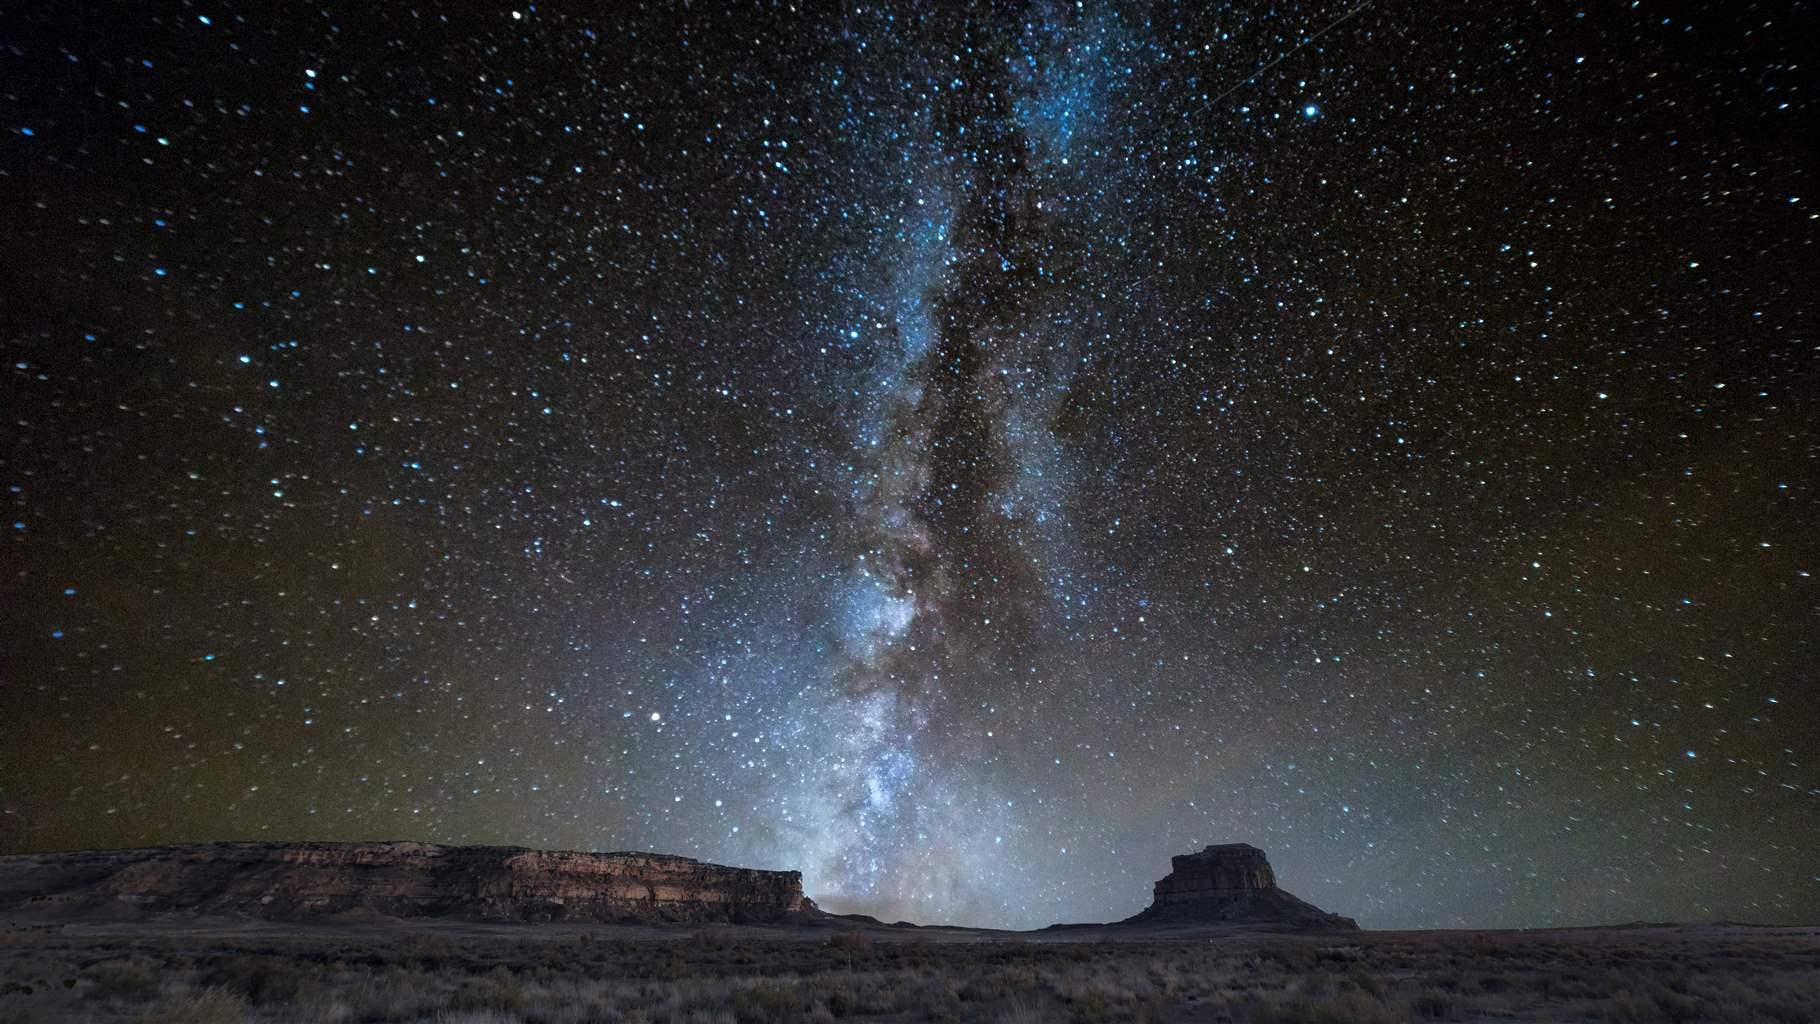 The Milky Way galaxy can be seen above a Western U.S. desert landscape at night